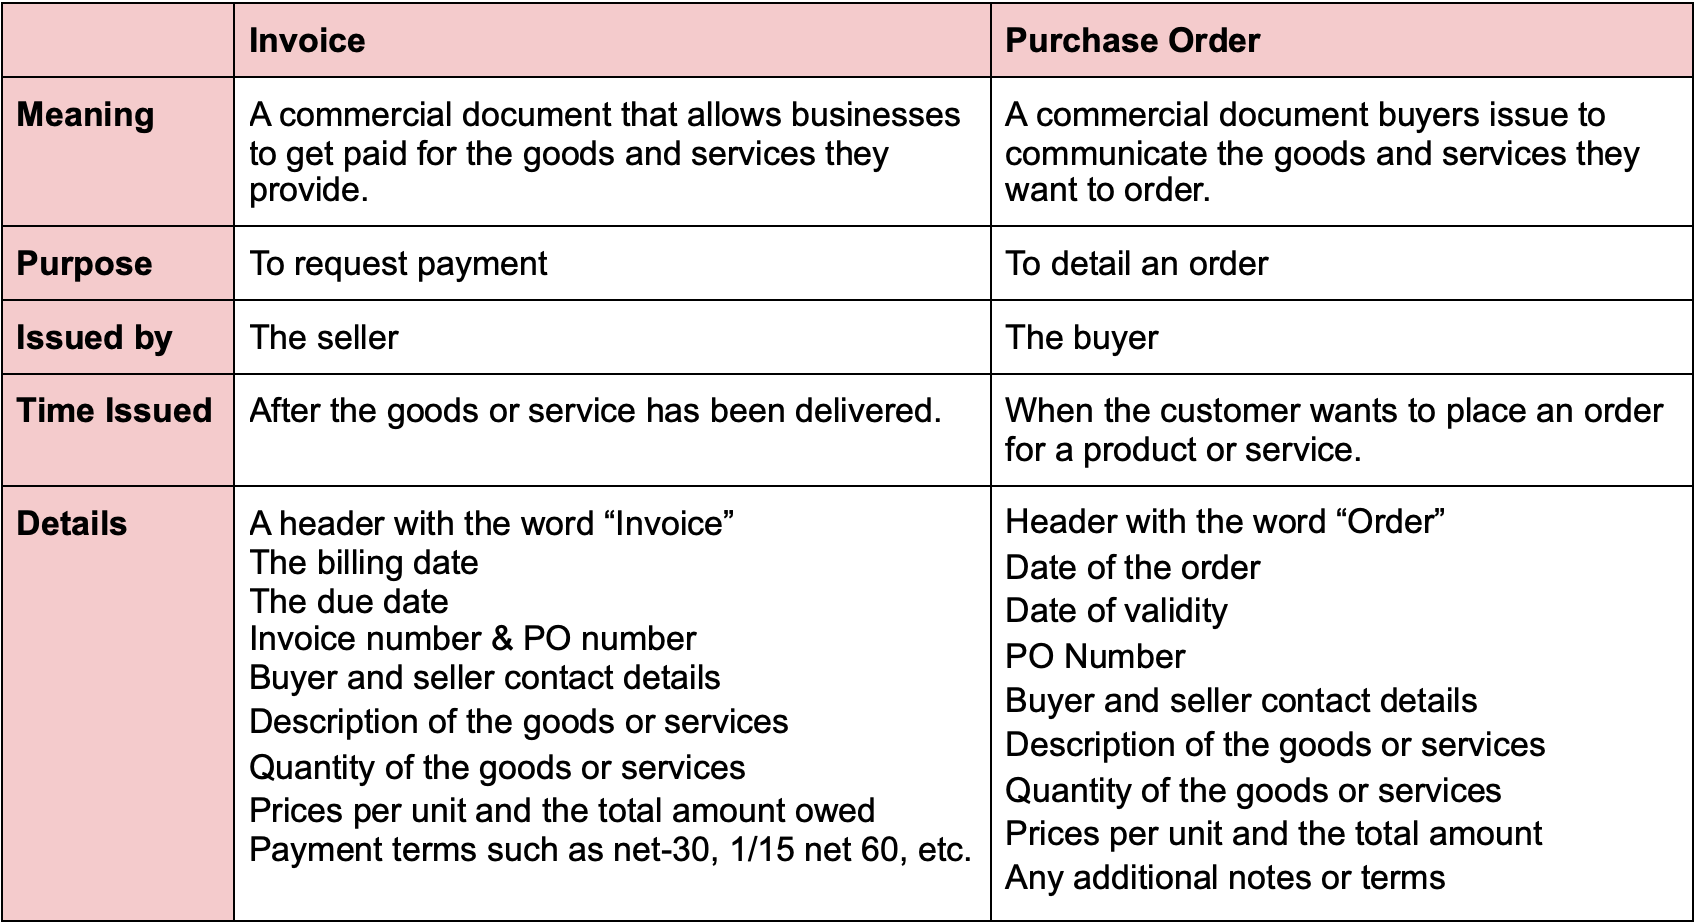 purchase-order-vs-invoice-what-s-the-difference